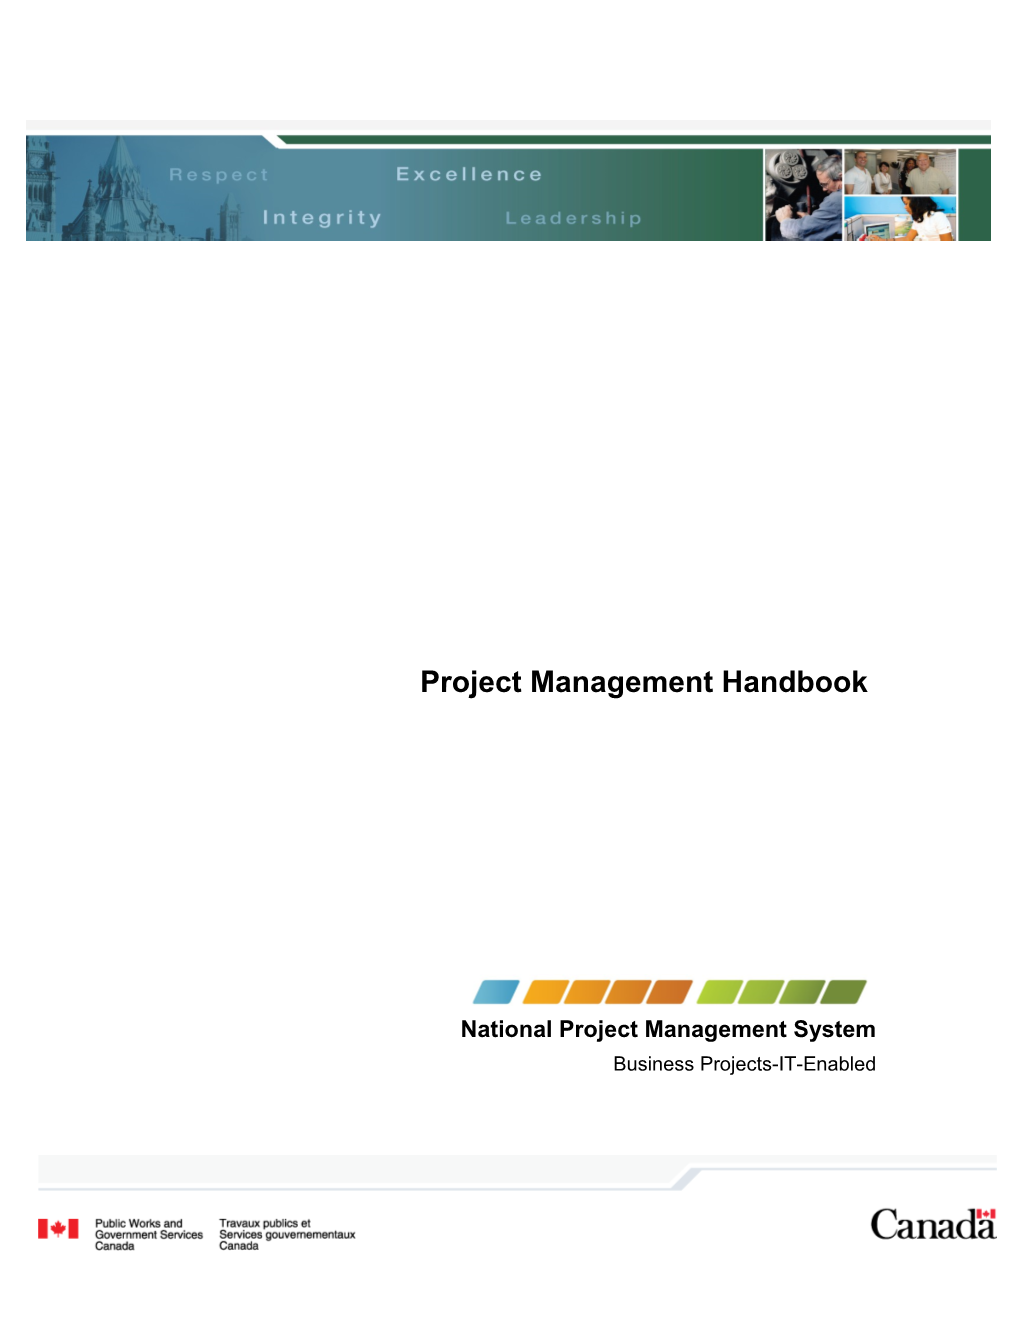 National Project Management System